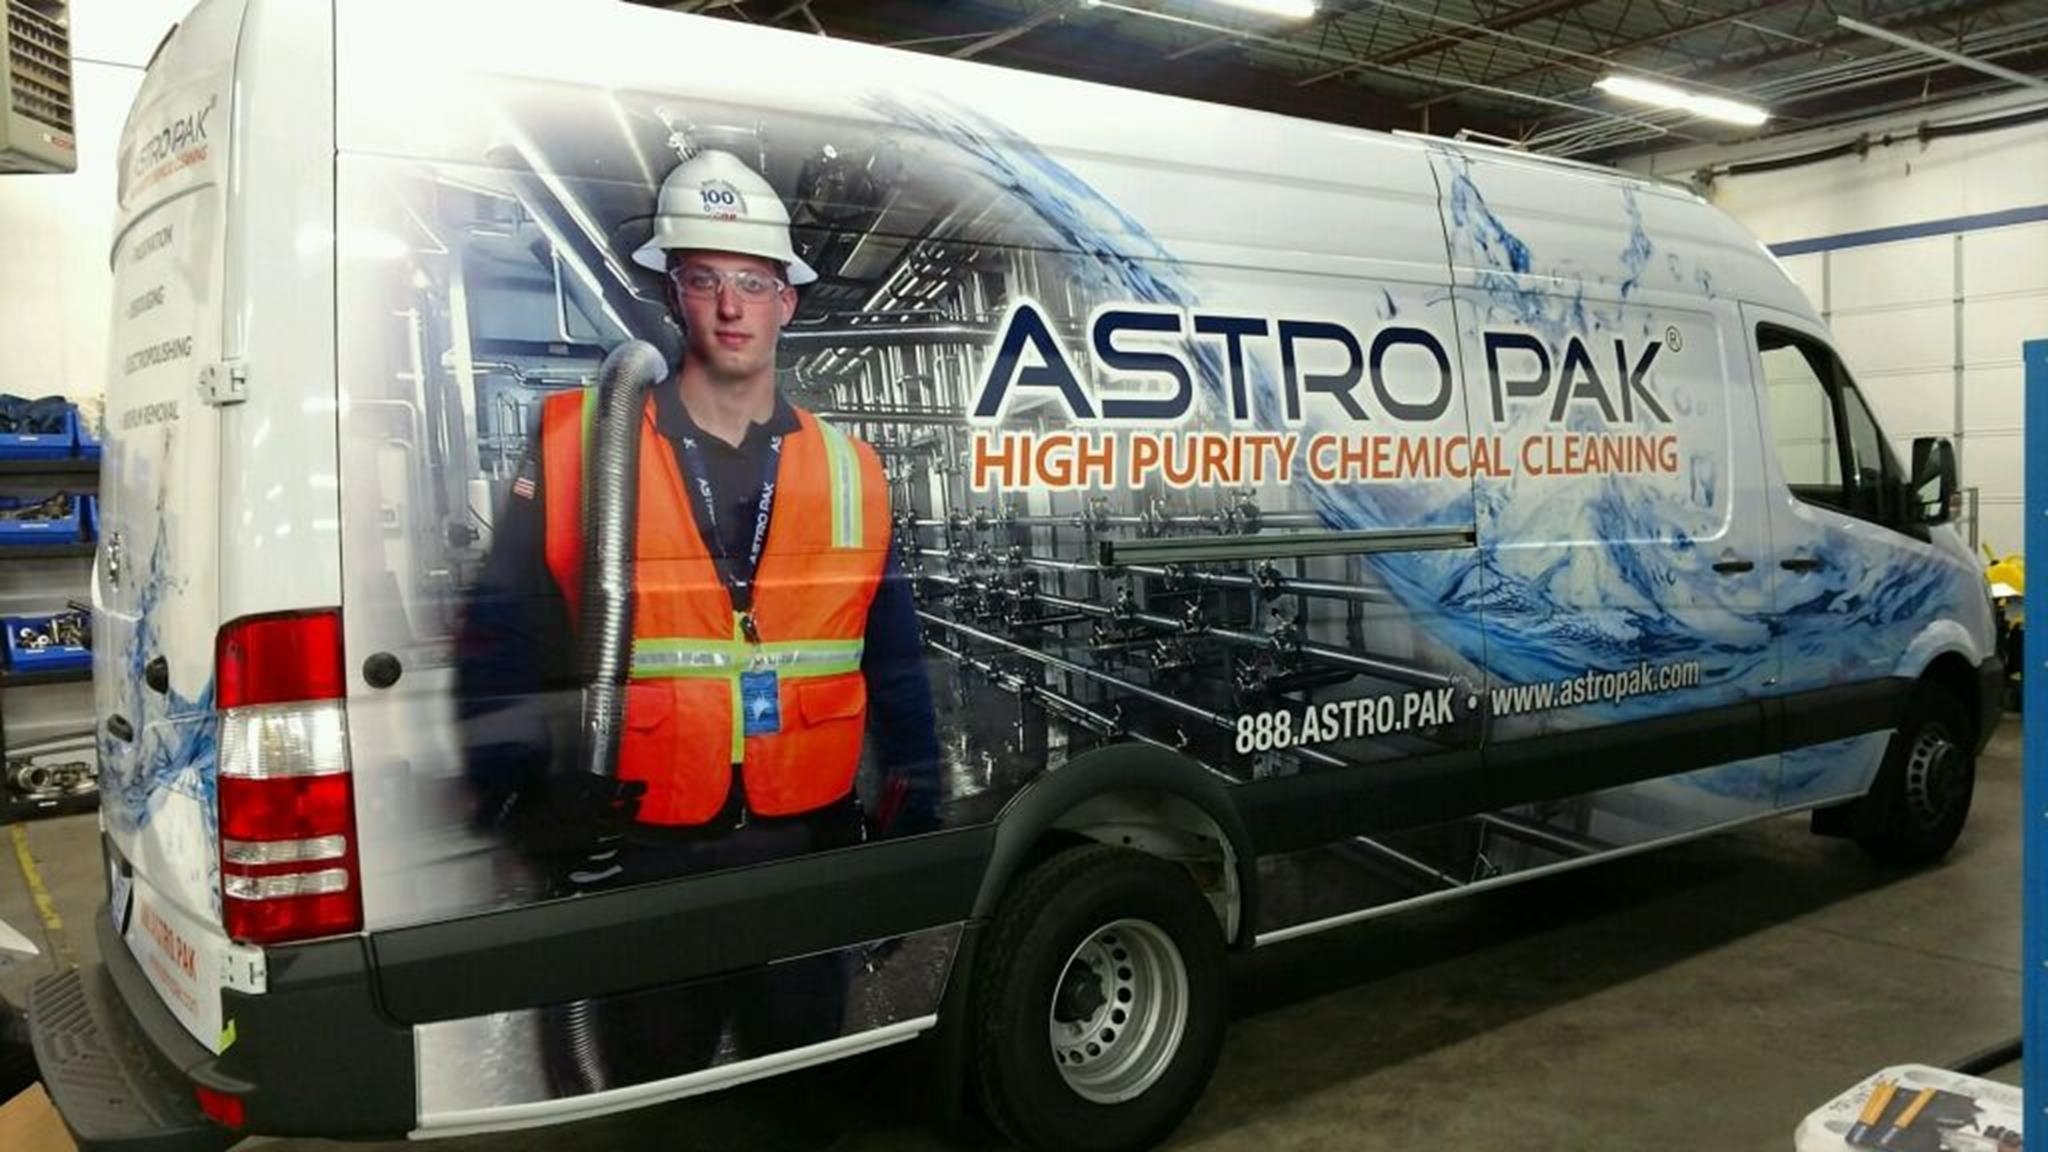 Full Truck Wrap for Chemical Cleaning Company